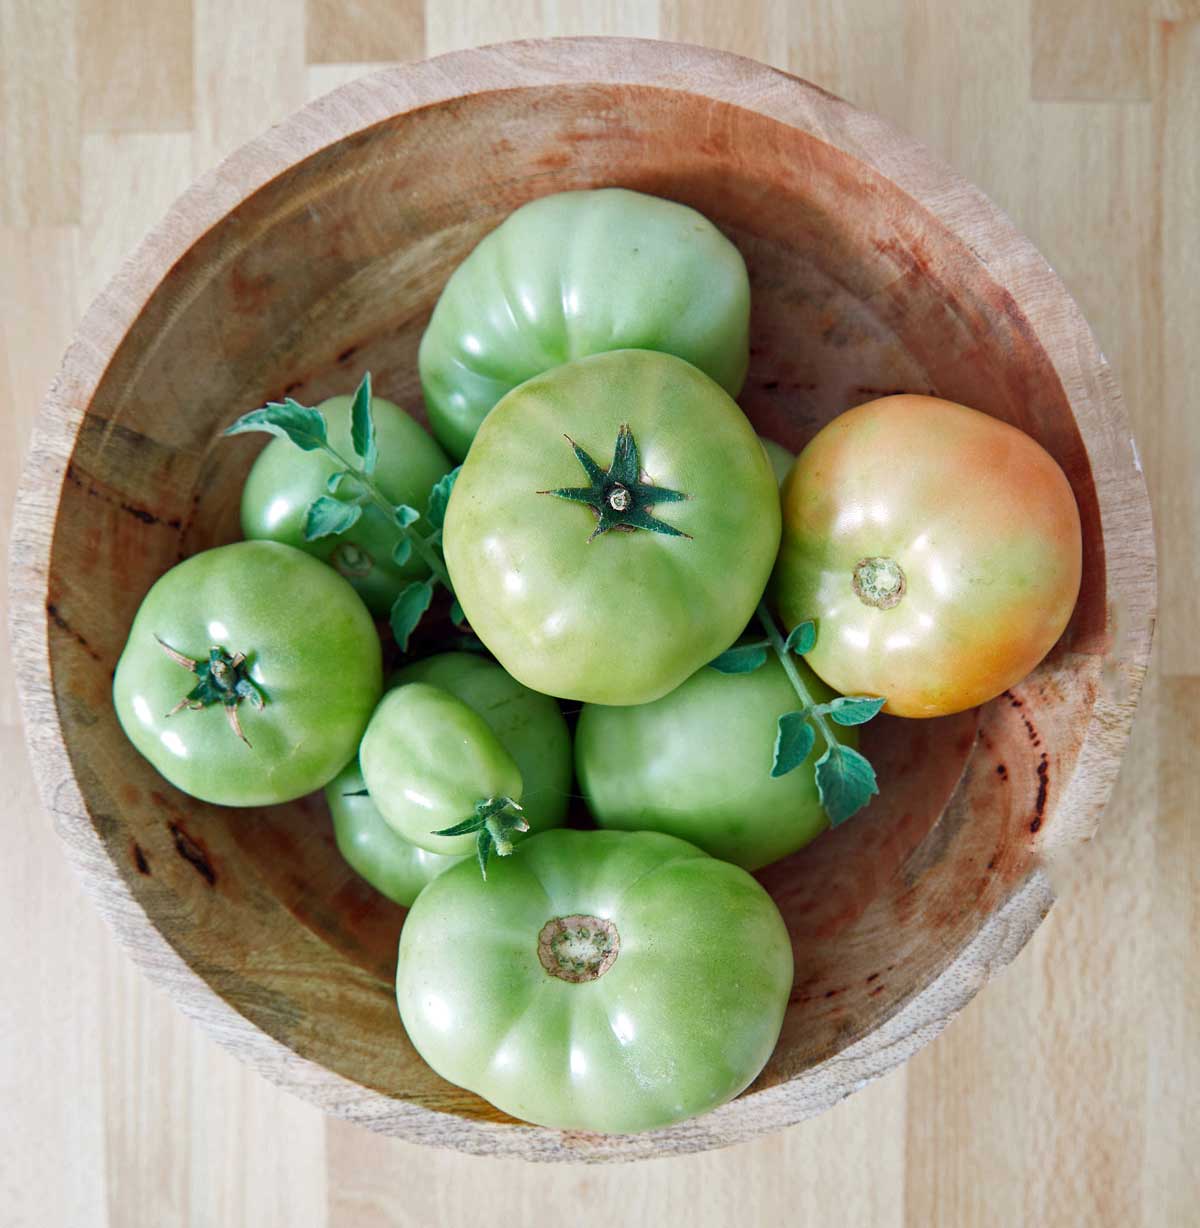 Green tomatoes served in a wooden bowl.